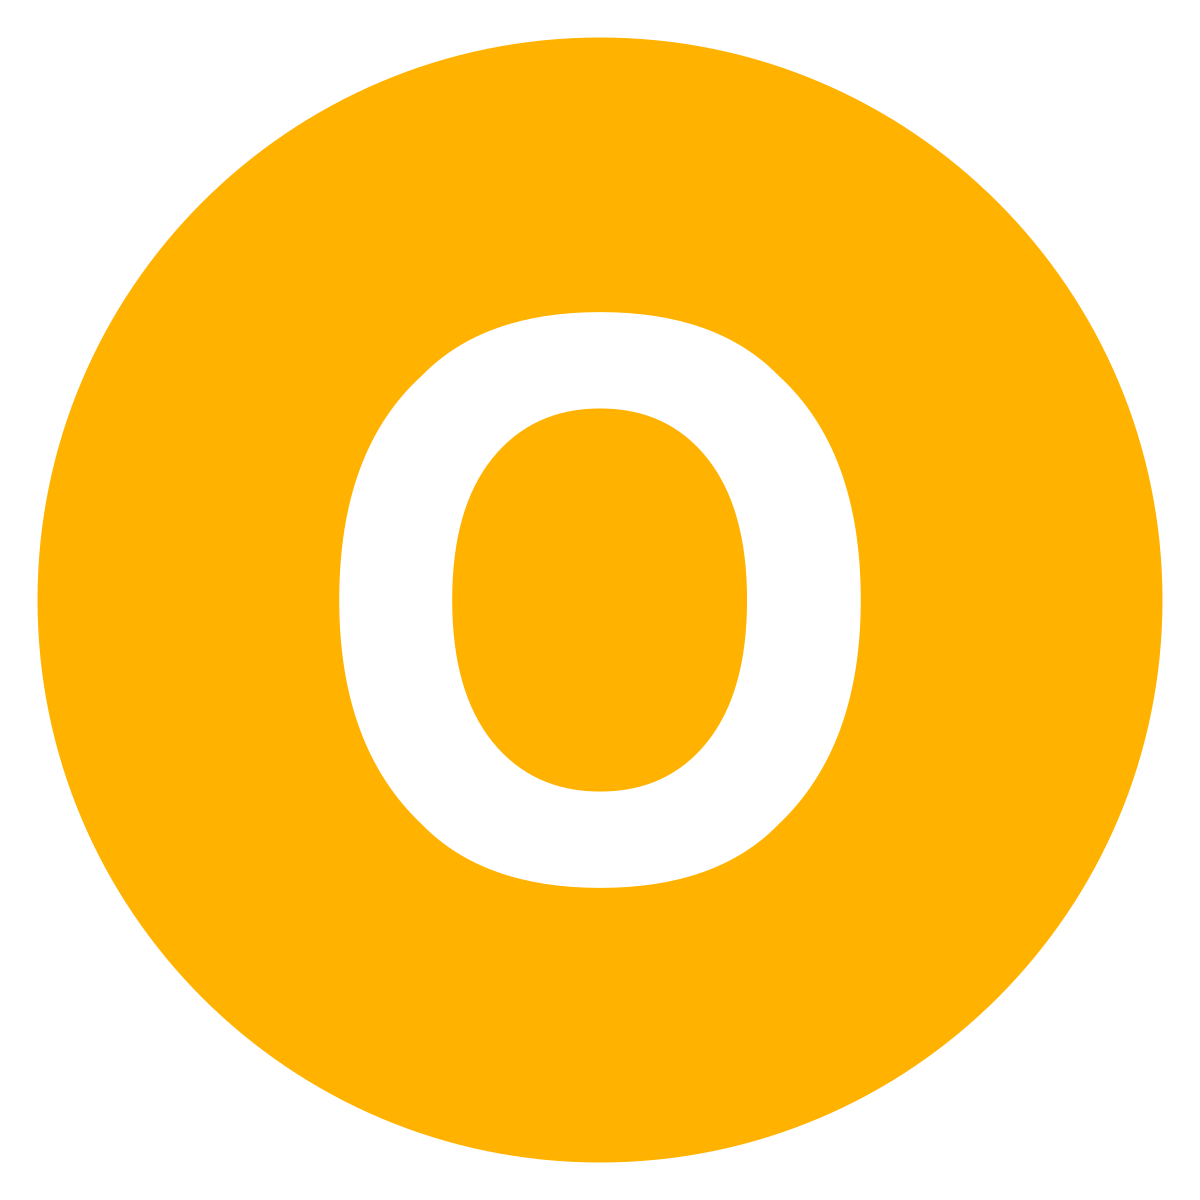 Download File:Eo circle amber letter-o.svg - Wikimedia Commons